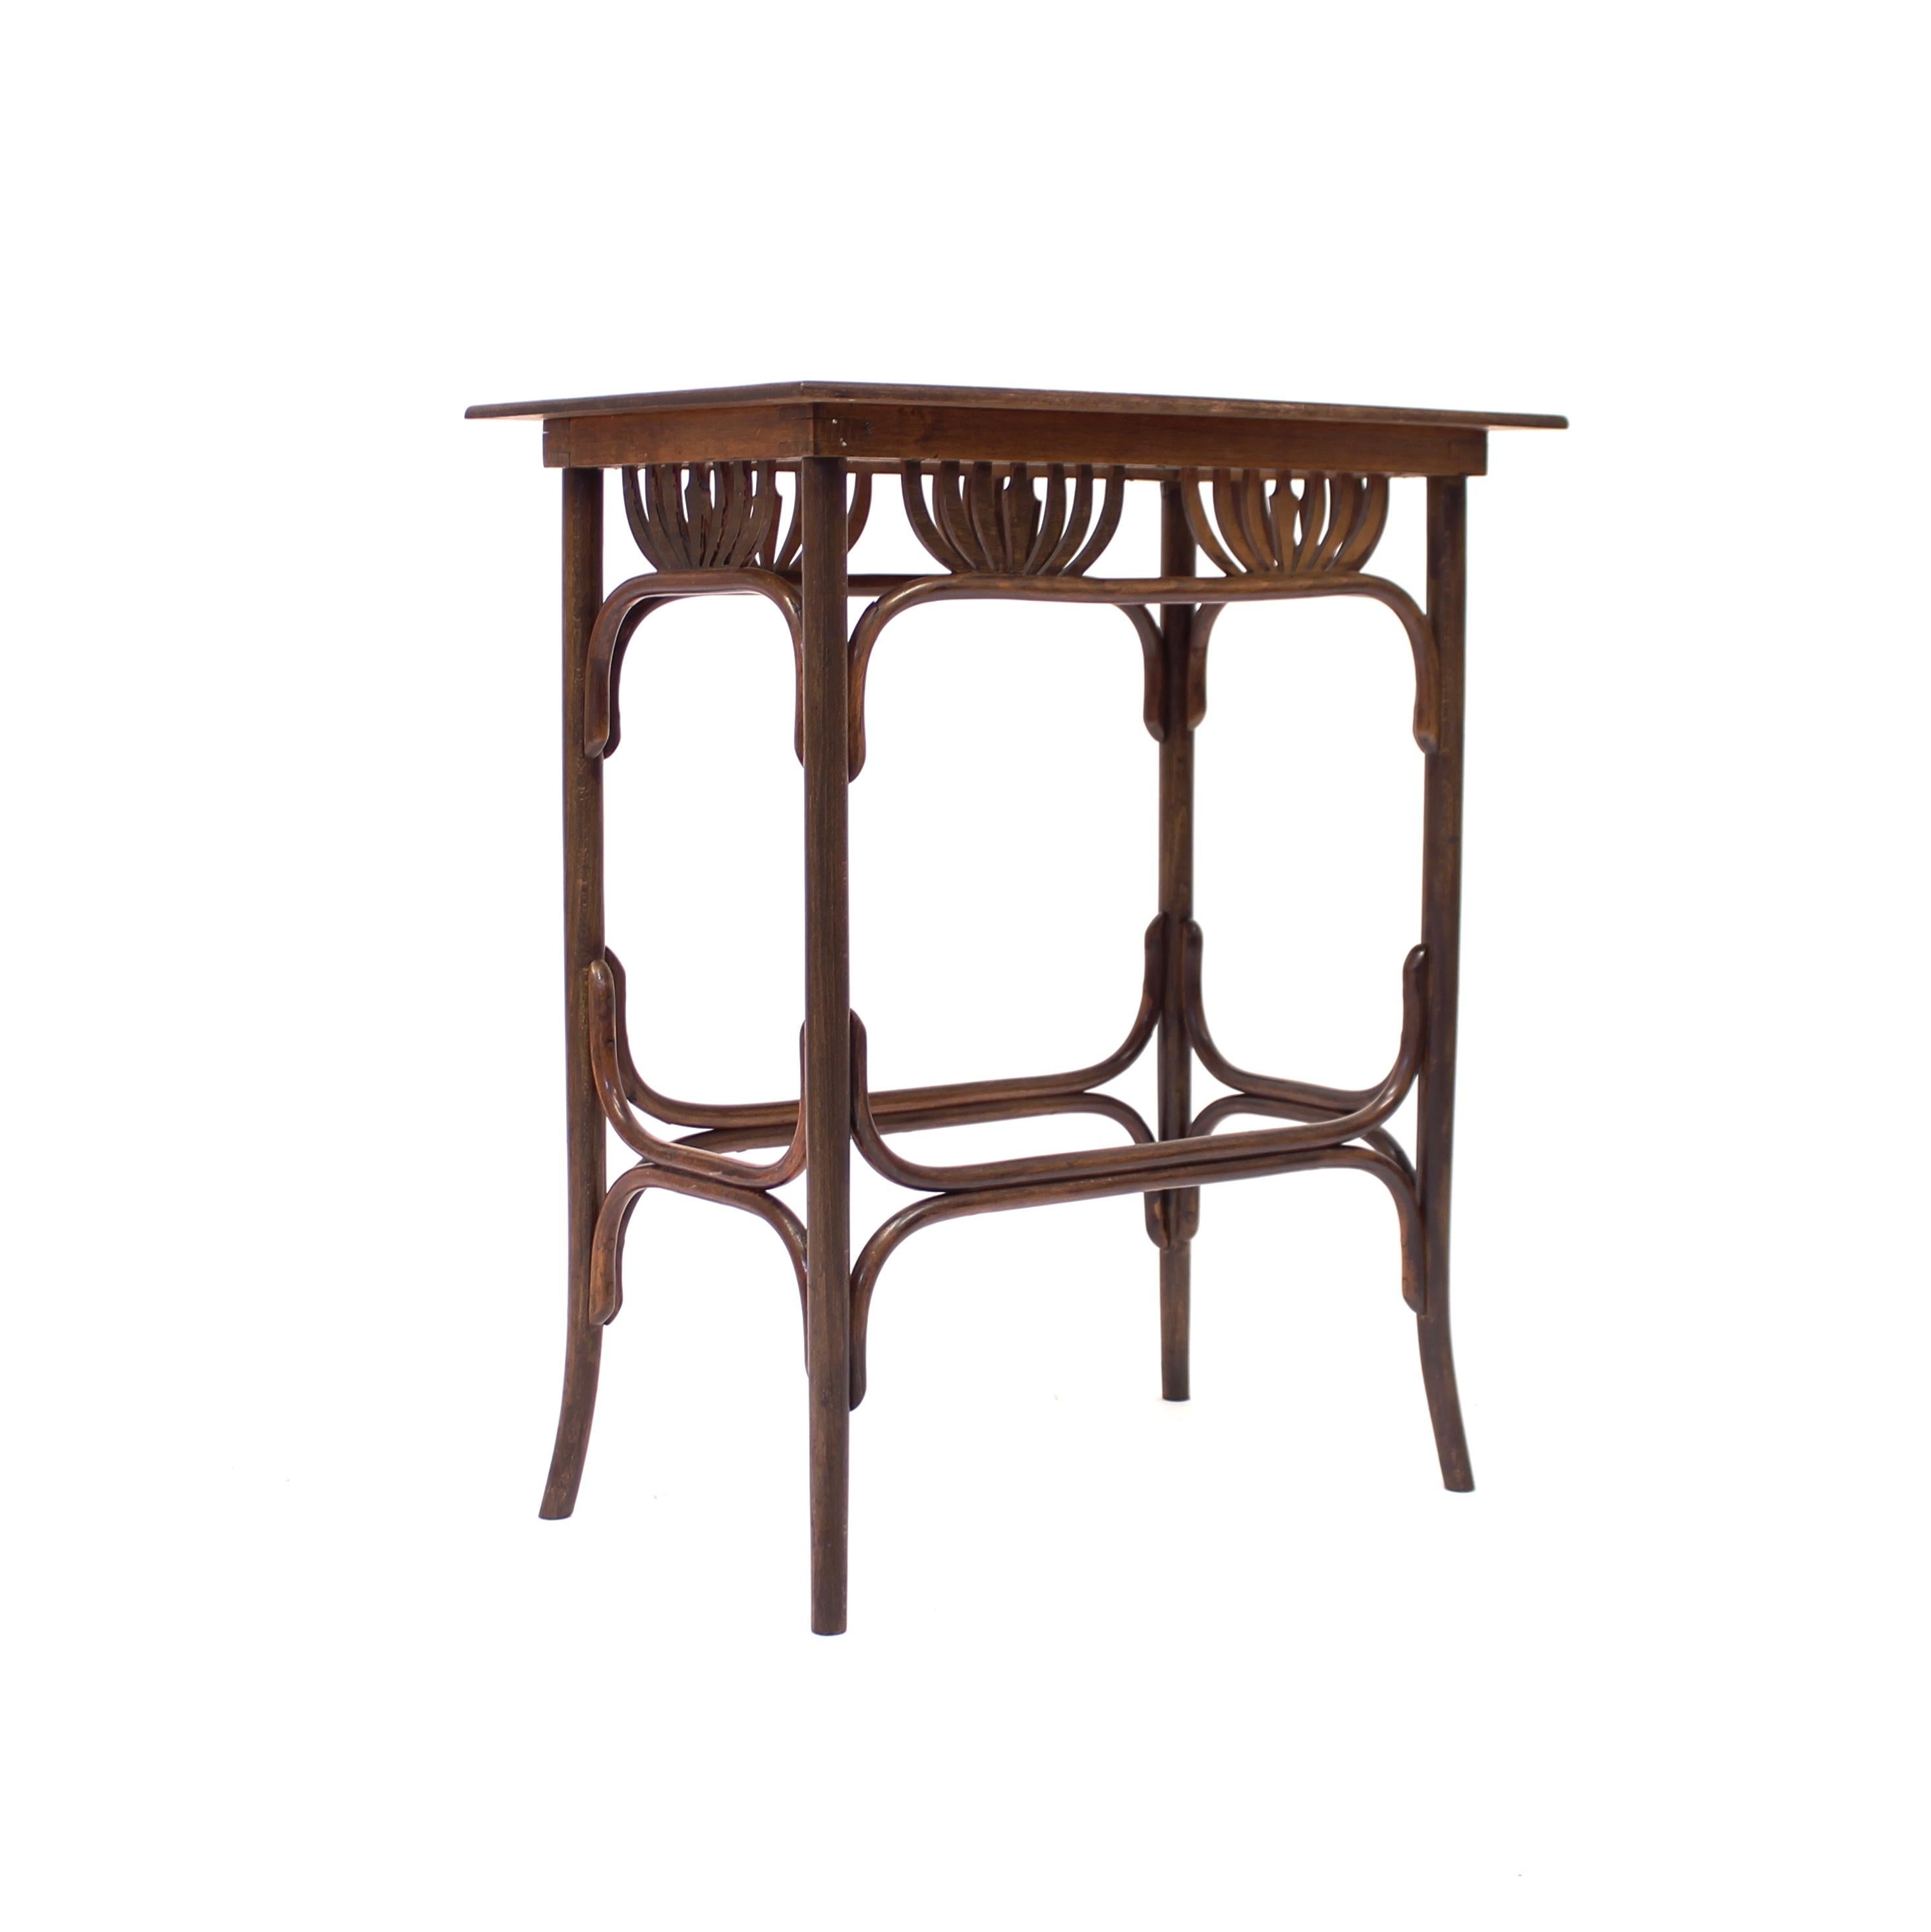 Bentwood side table, attributed to be made by Fischel who alongside Thonet and Kohn was one of the largest and most important producers of bentwood furniture at the turn of the century 1900. Although unmarked. Rare model that would be perfect in a